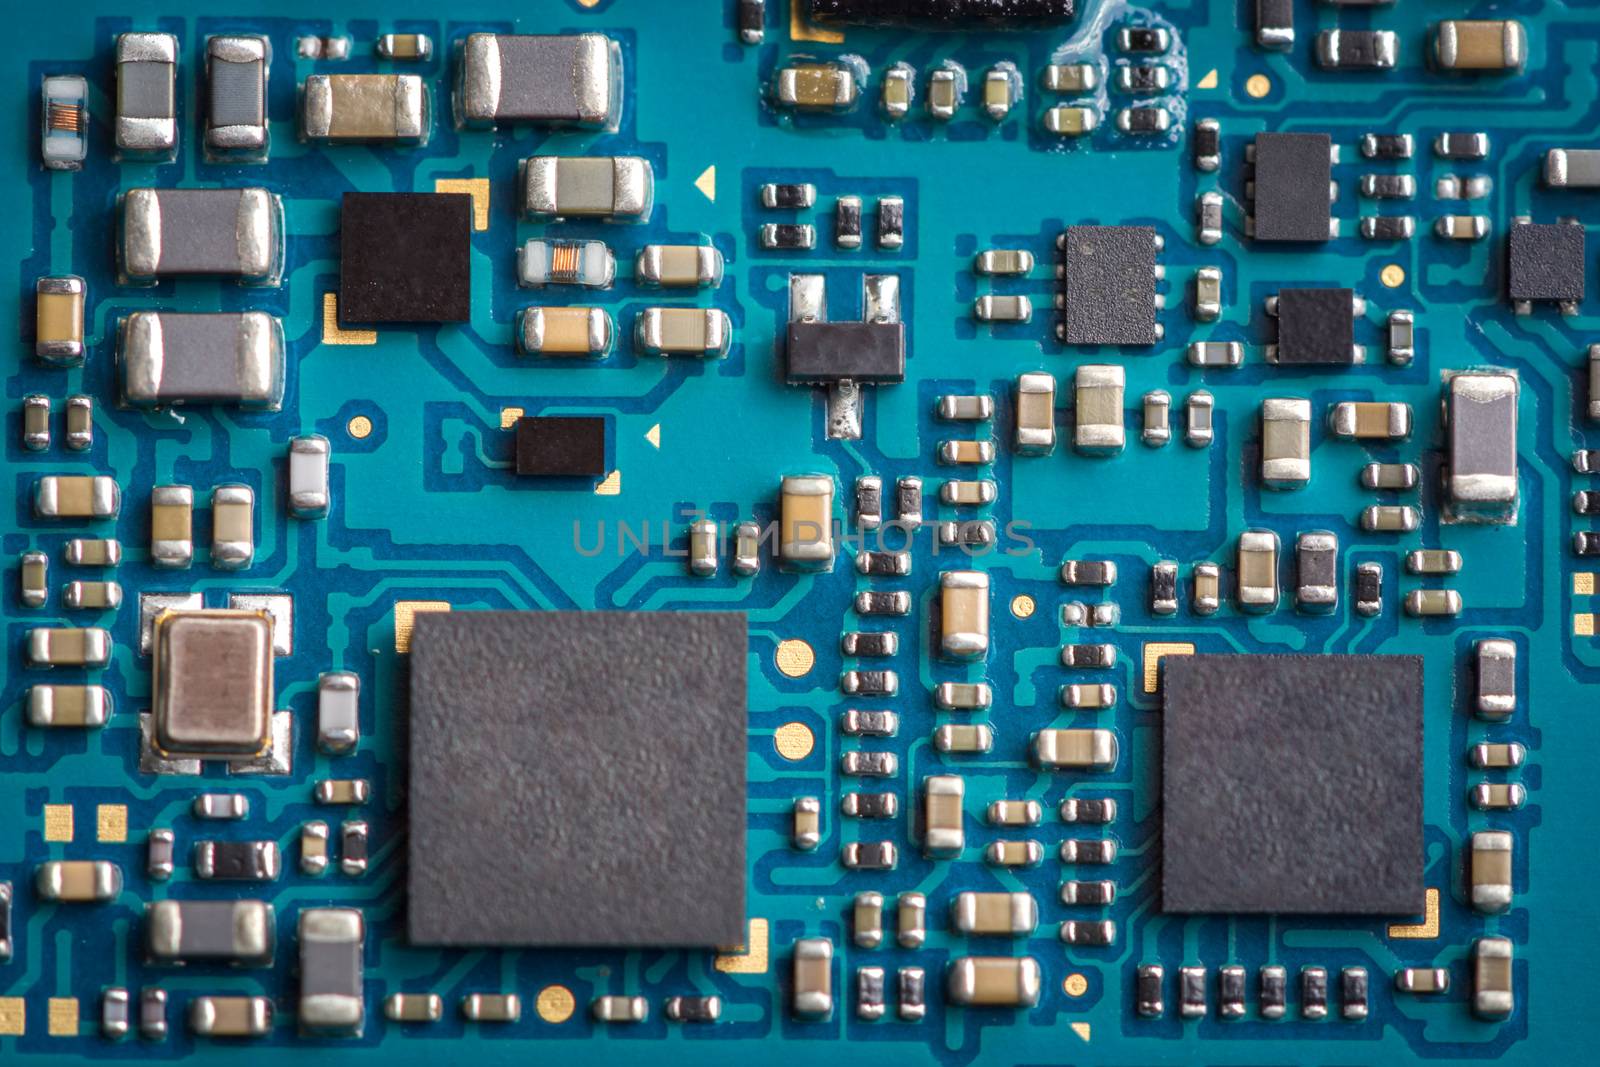 Close up zoom shot of mobile phone mother board with microchips and circuits. For phone repair service or center.